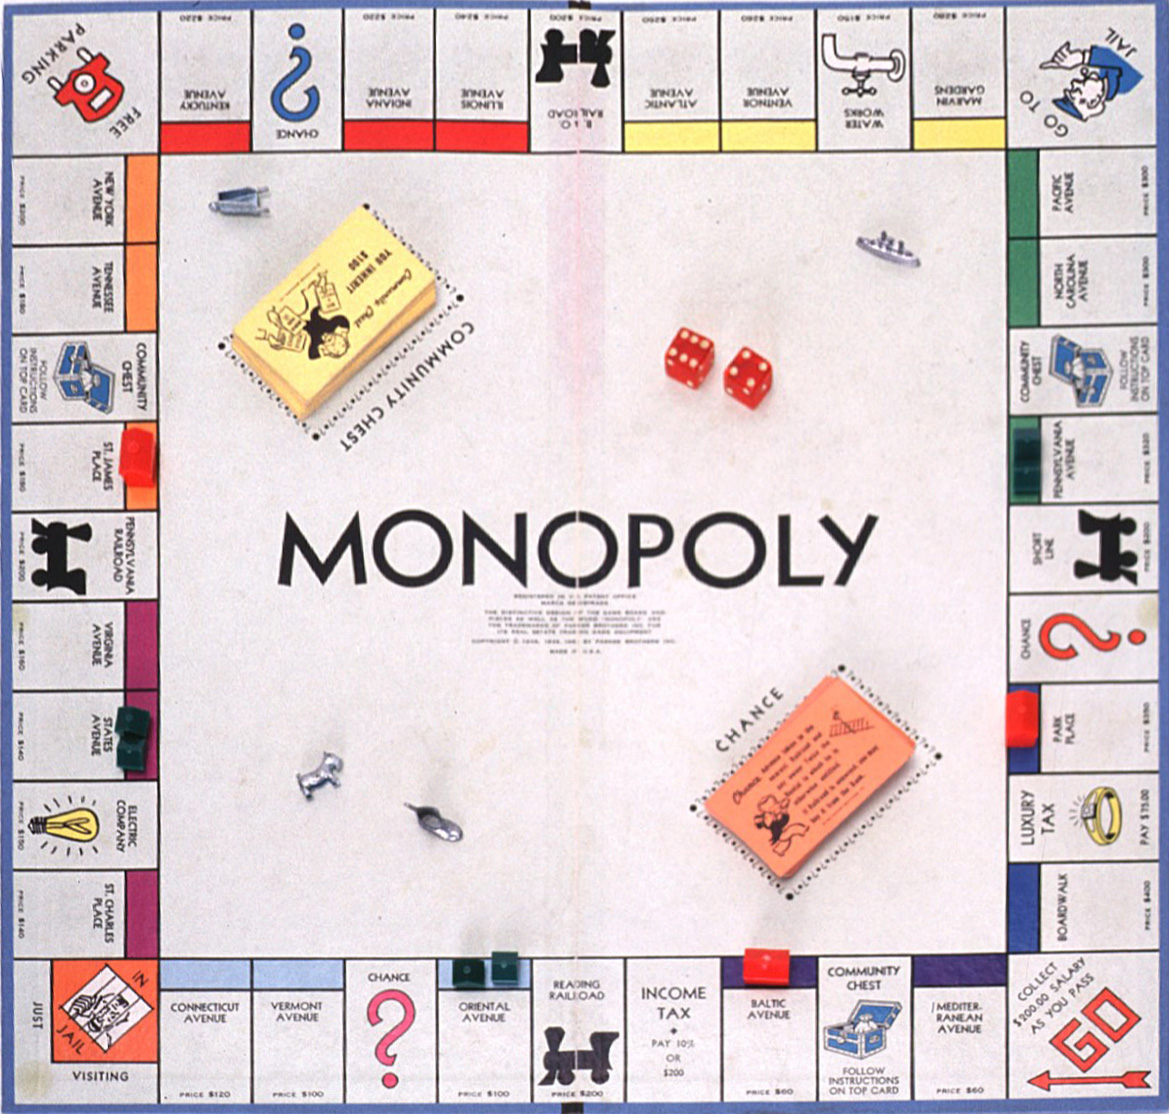 Classic Monopoly board (looks a little dirty, even)